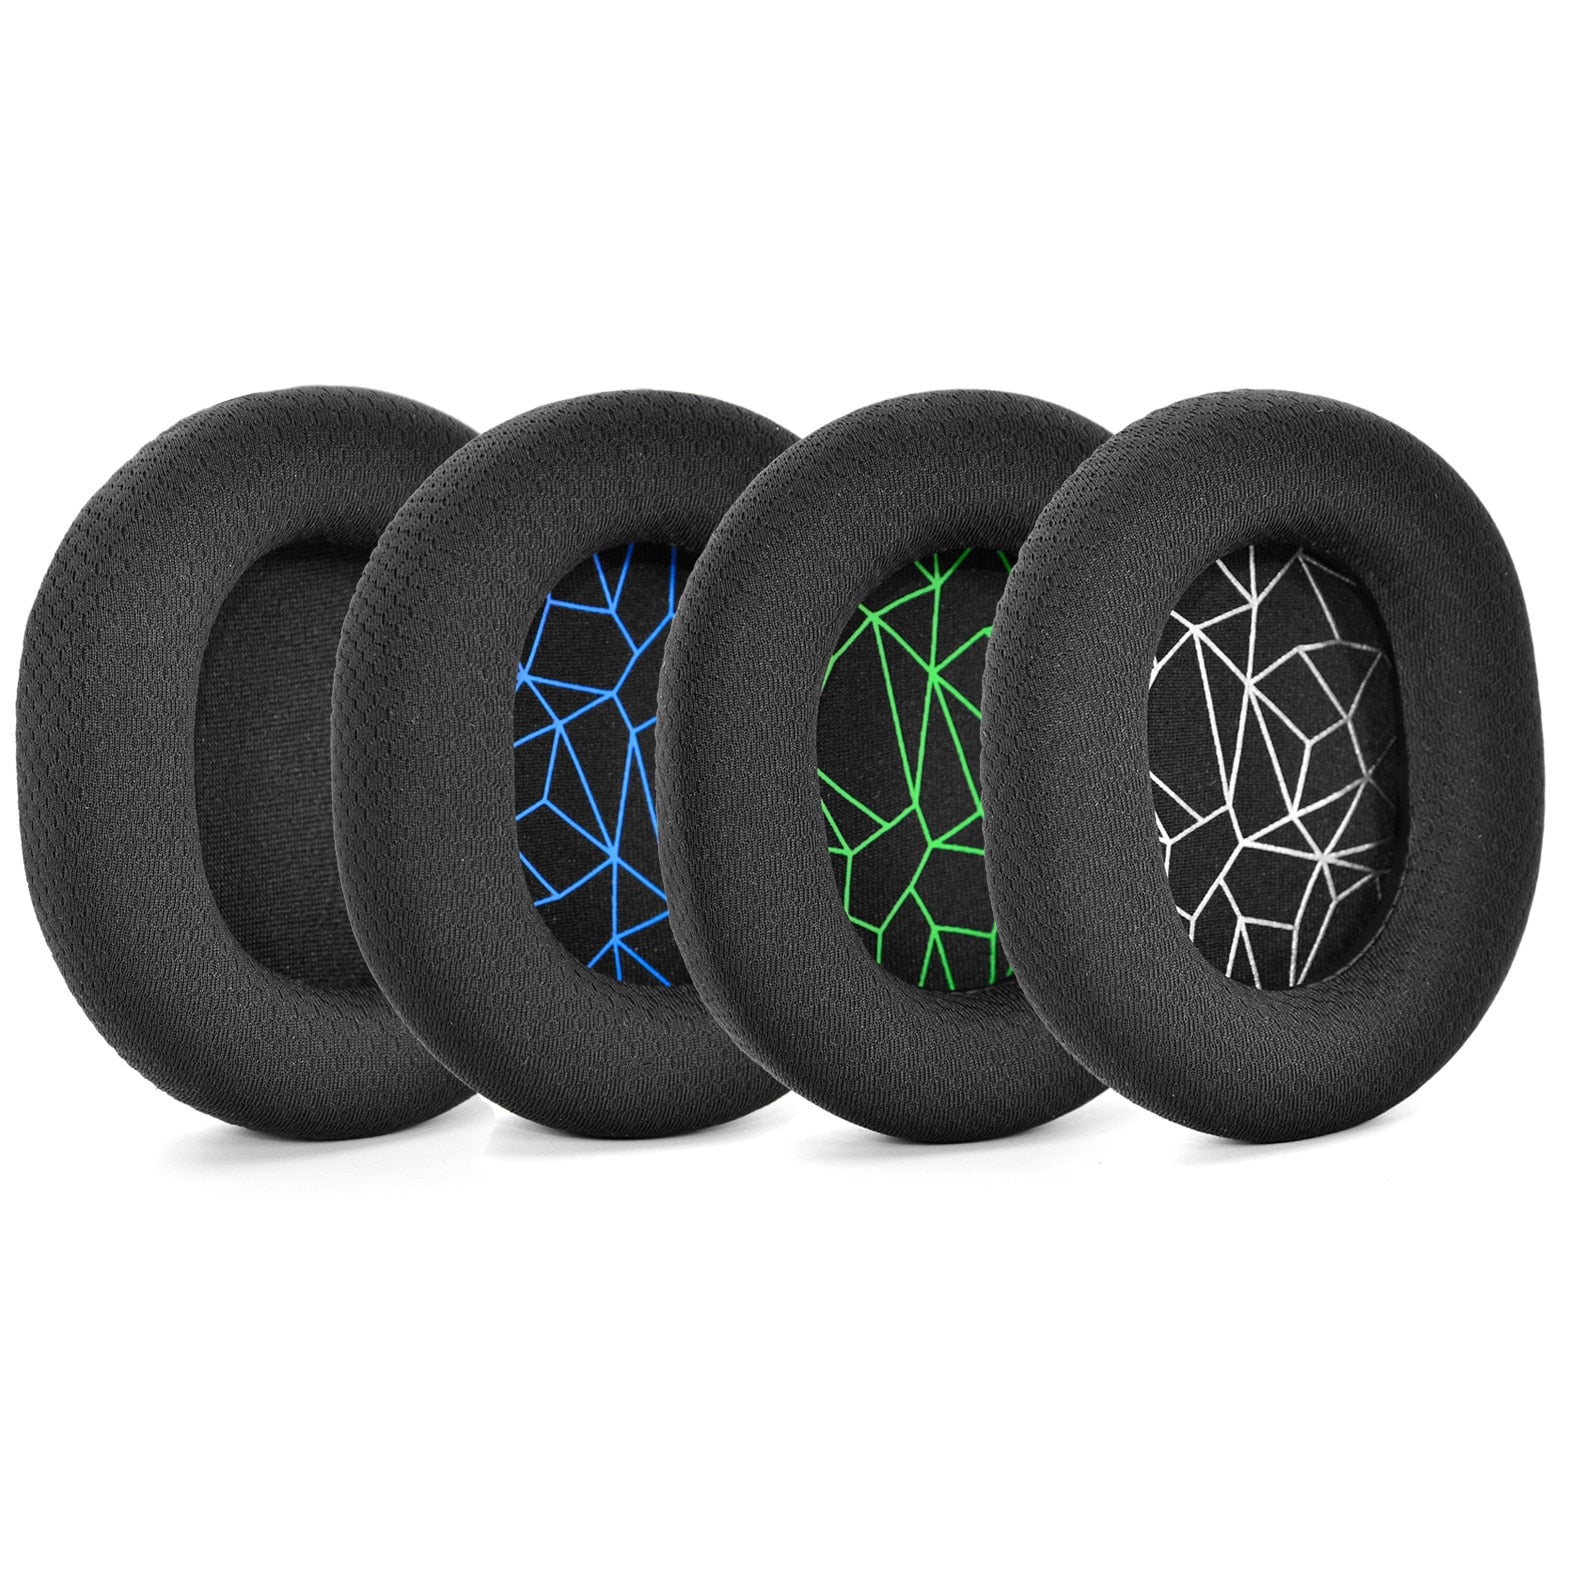 4 SteelSeries Foam Earpads with black, blue, green and white arctic design